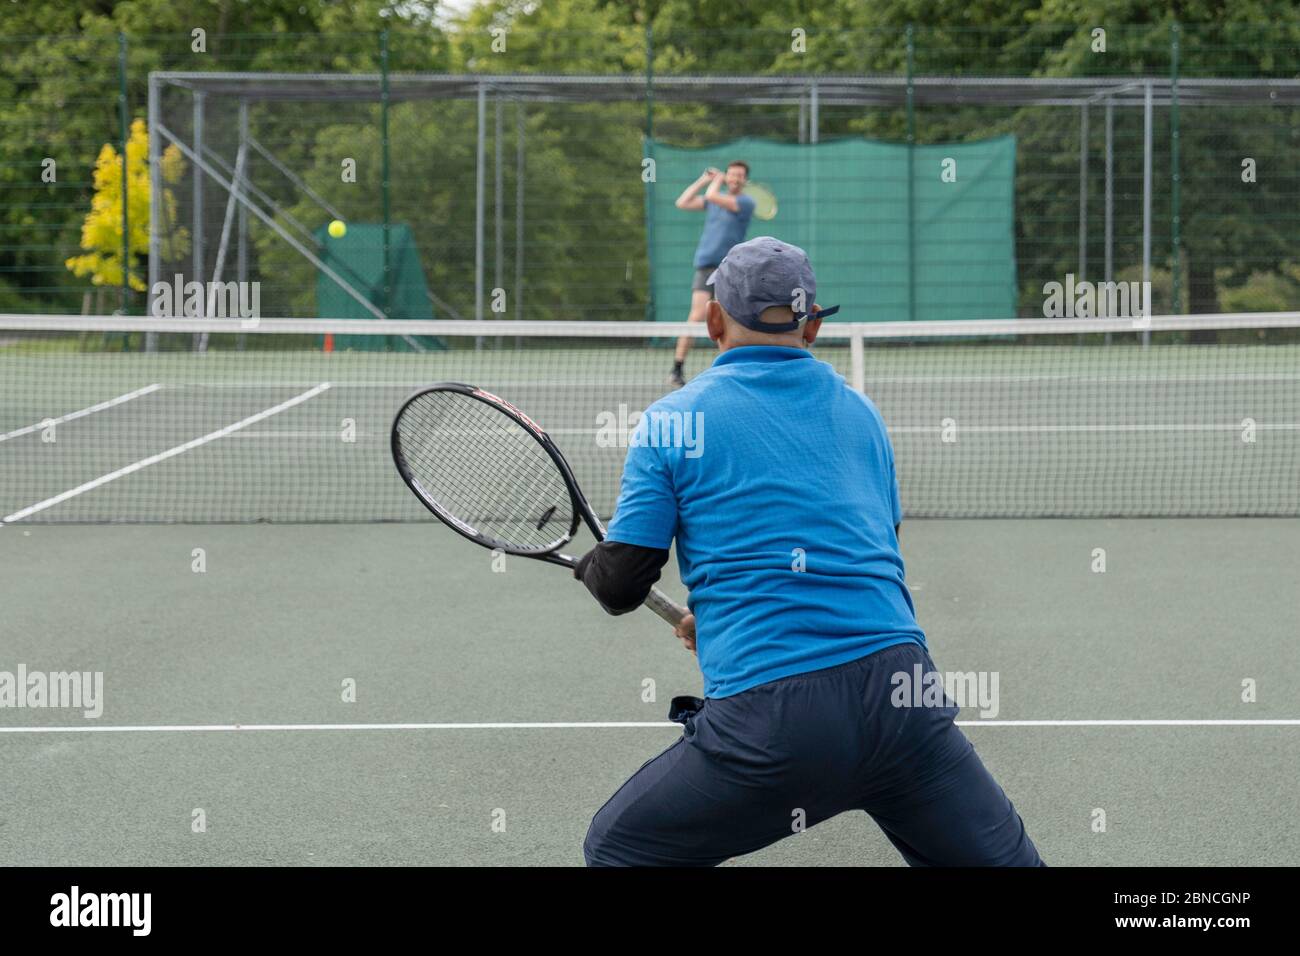 Brockwell Park, UK. 14th May 2020. People playing tennis in Brockwell Park  following Government advice that lockdown rules have been relaxed for a  small number of sports. Tennis, along with golf and